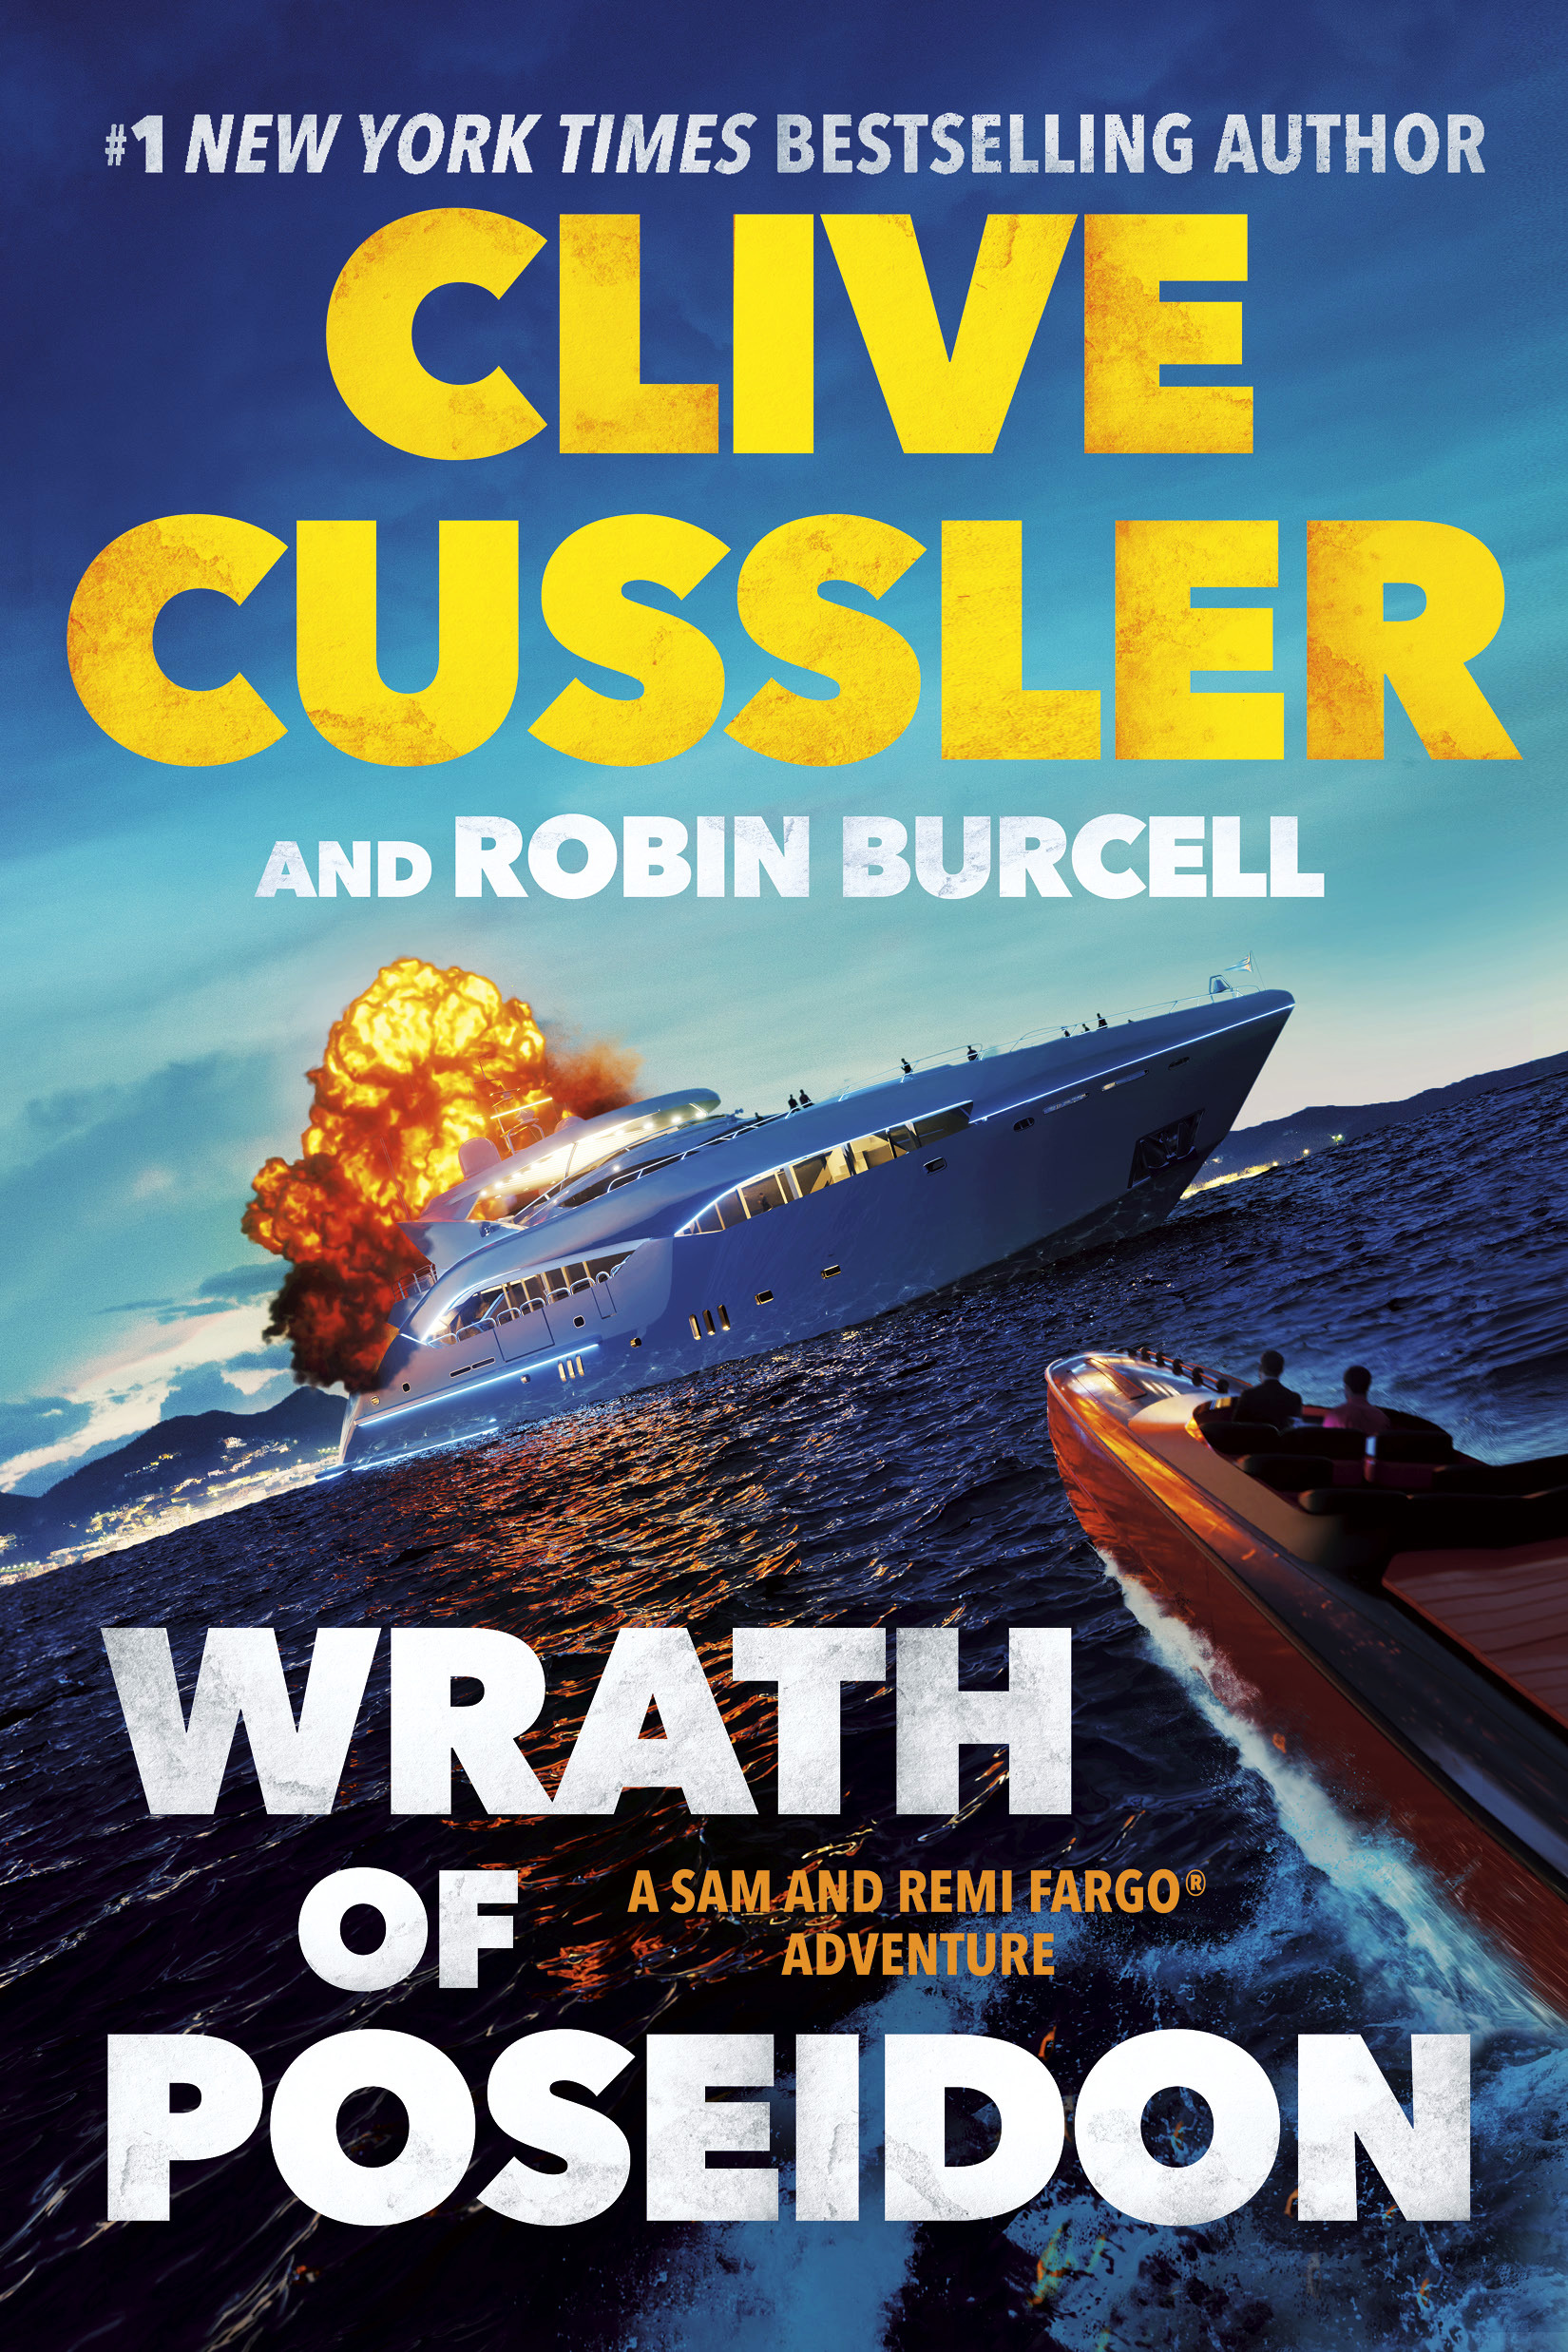 Wrath of Poseidon | Cussler, Clive